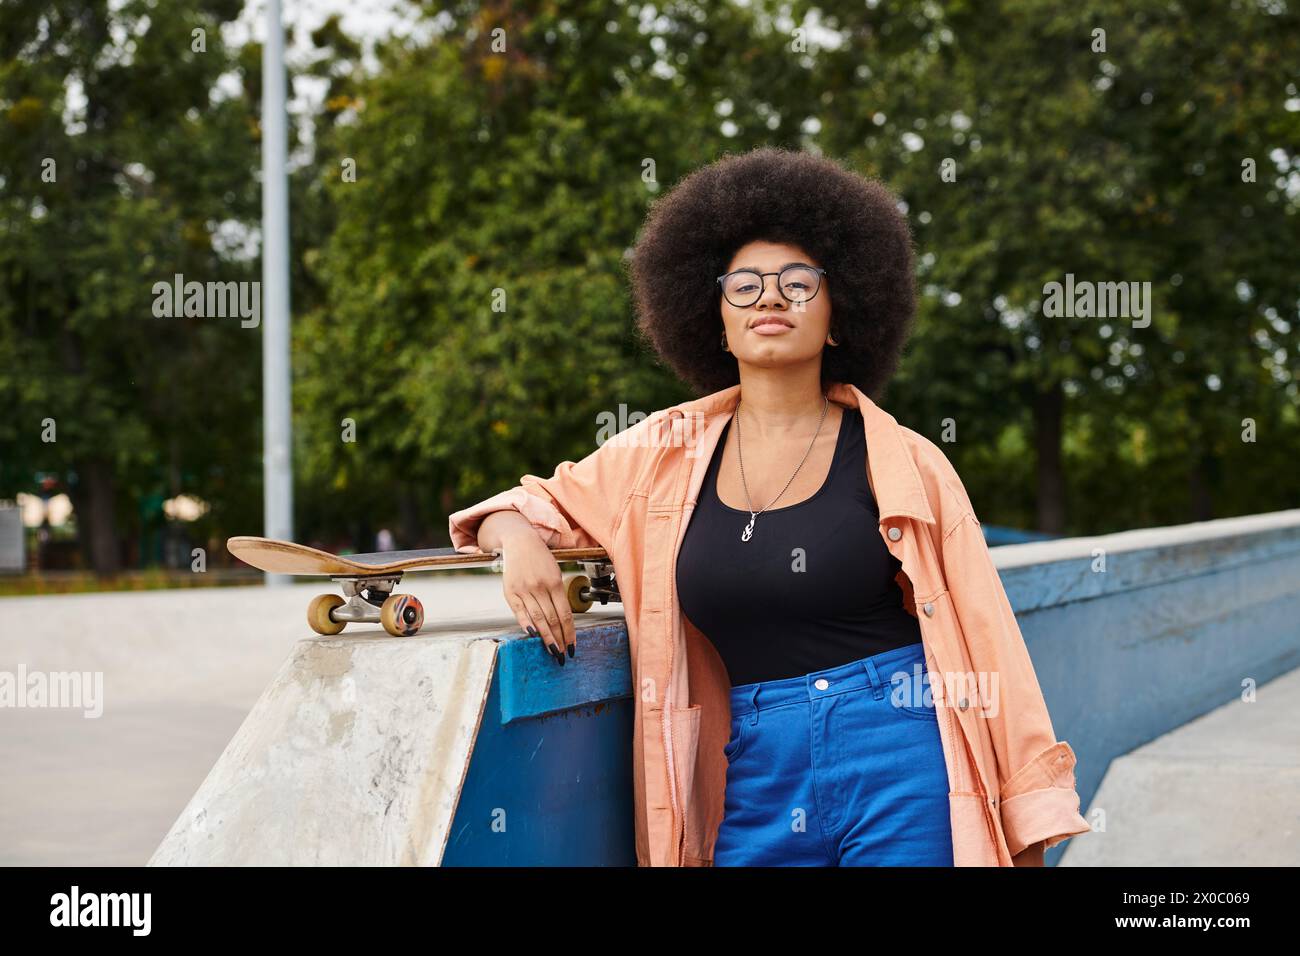 A young African American woman with curly hair stands confidently next to a skateboard on a skate park ramp. Stock Photo